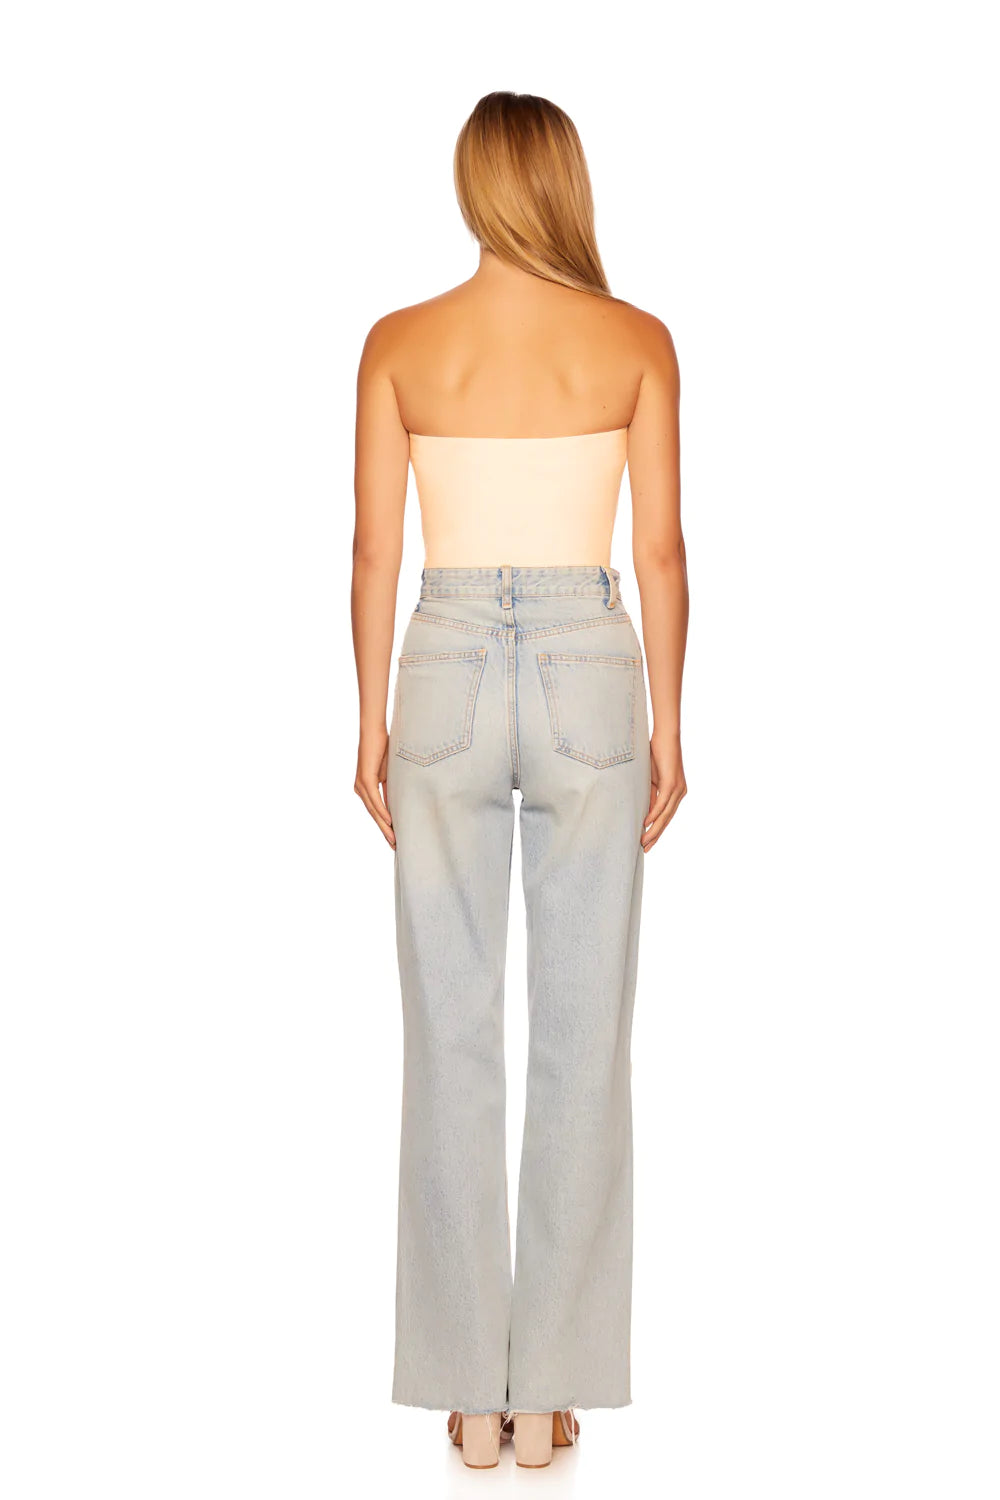 Faux Leather Crop Tube - Cream